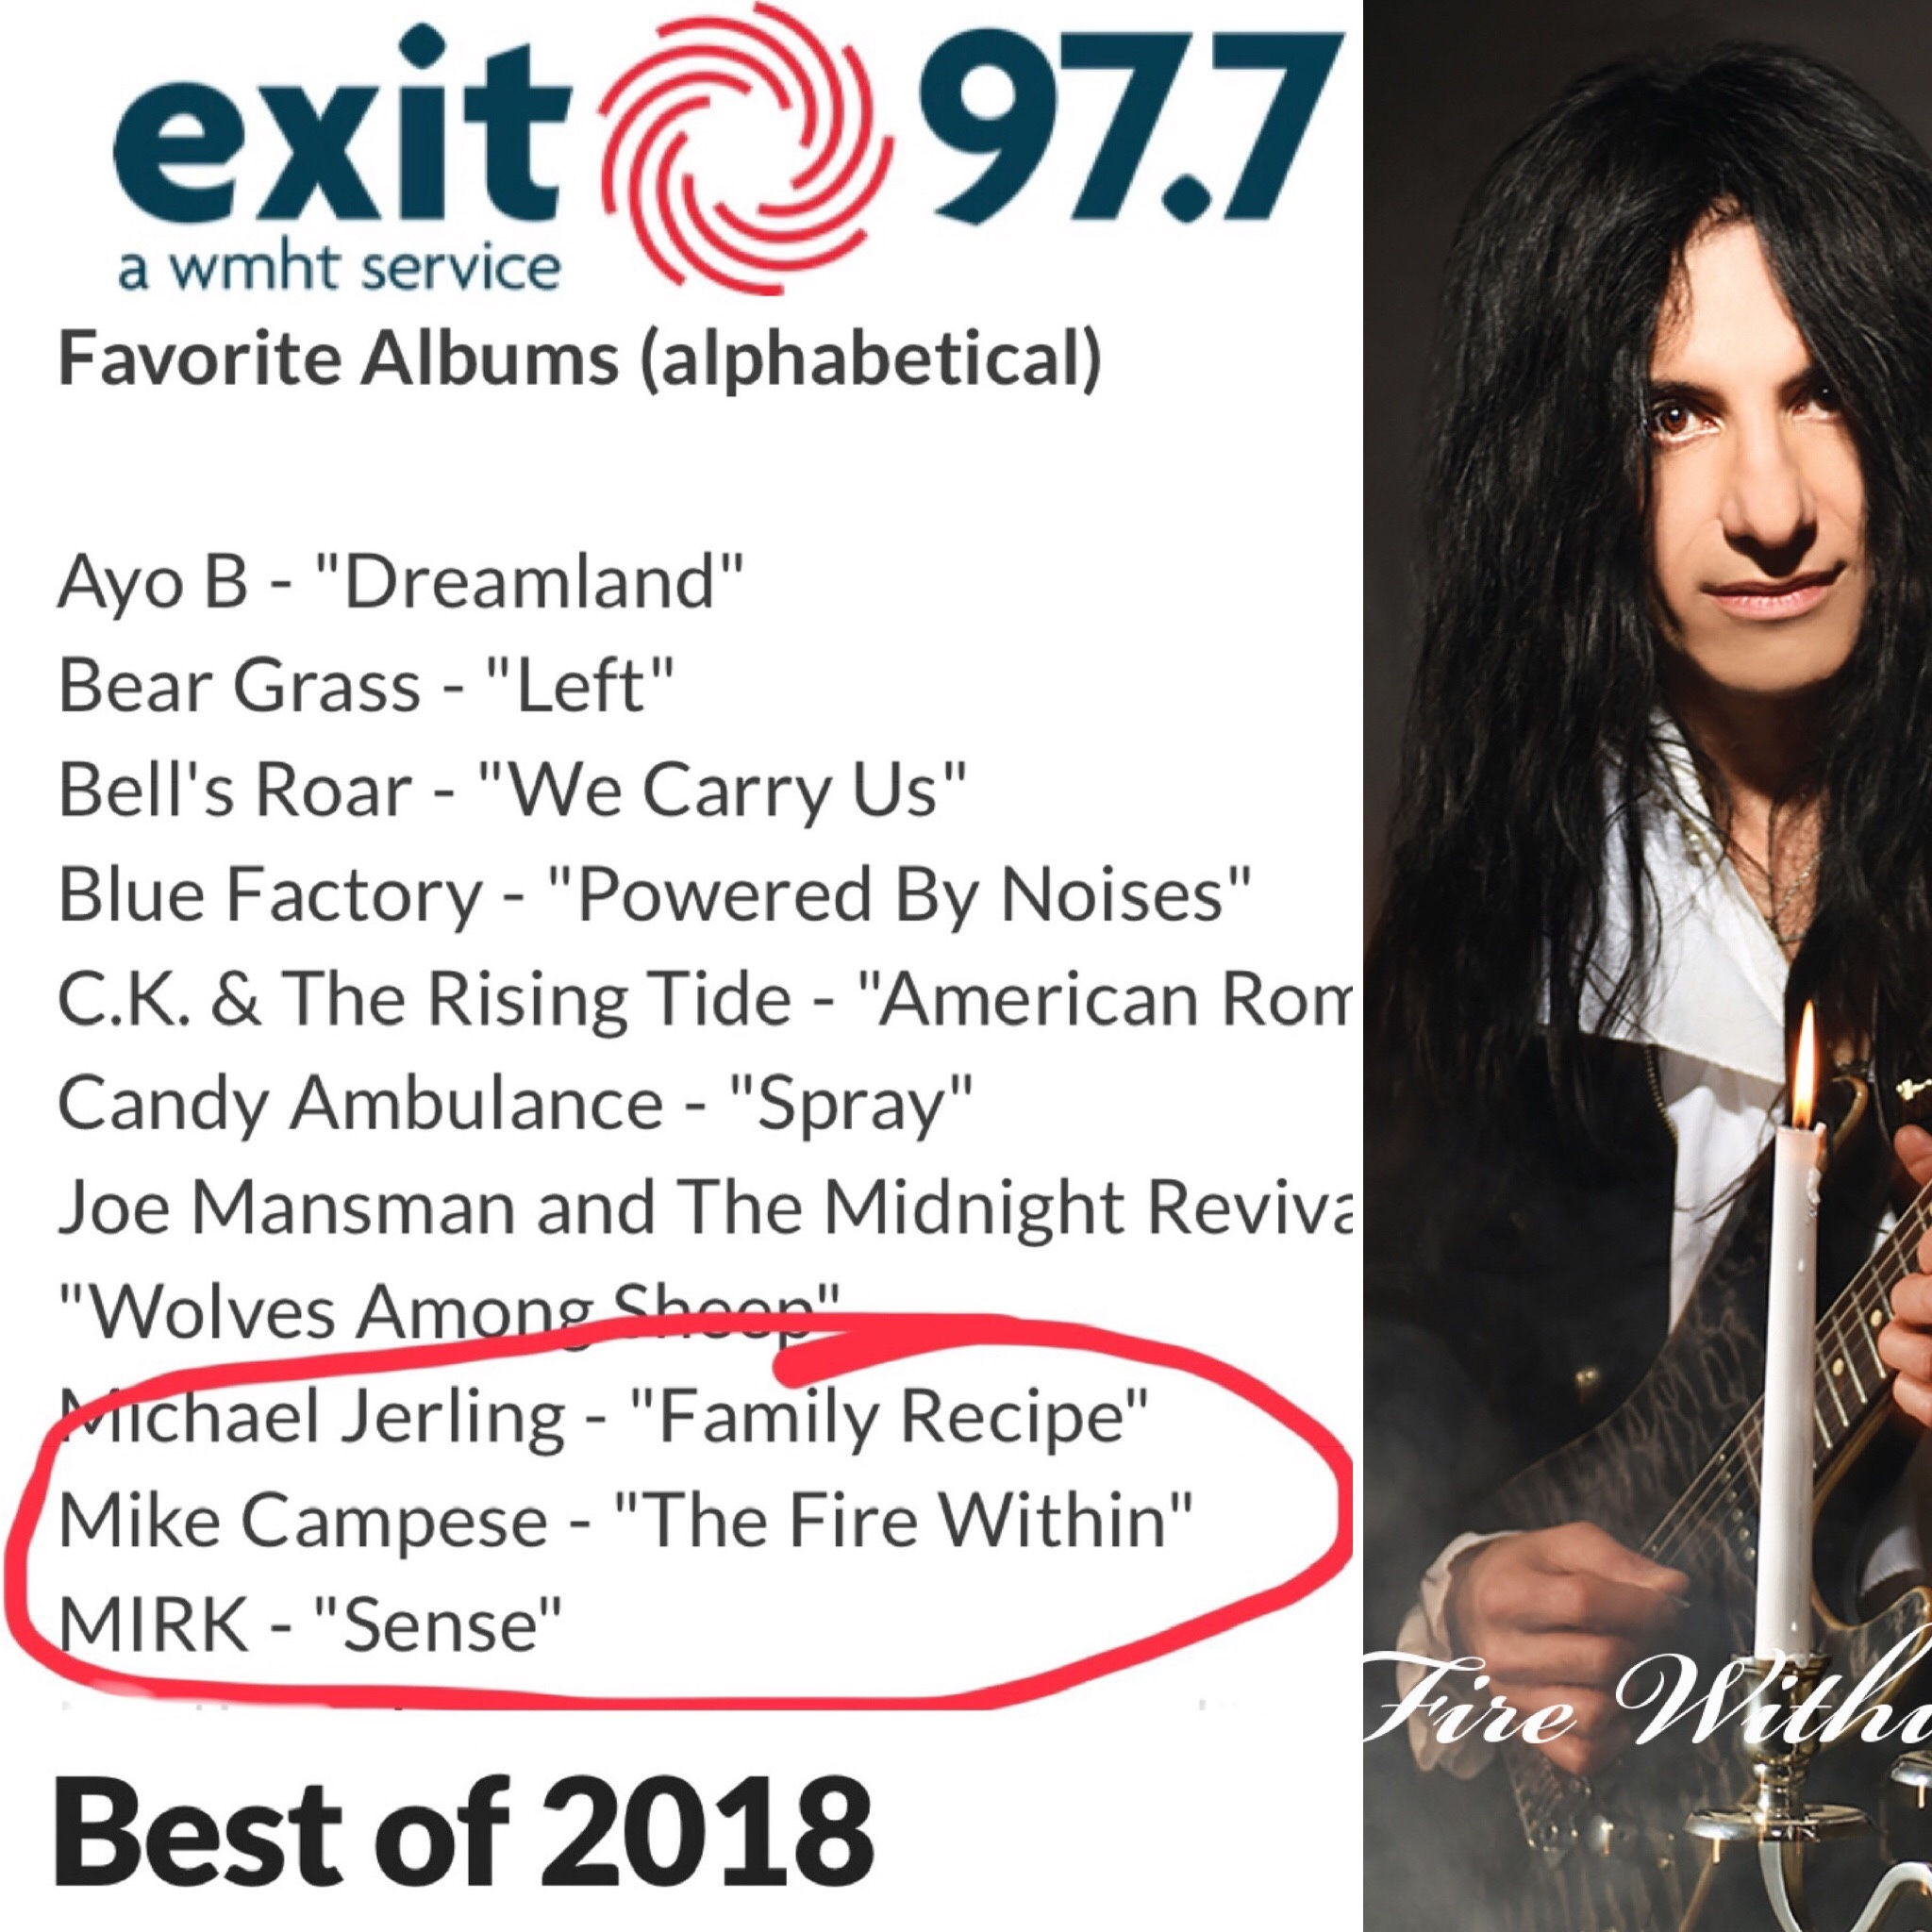 Best of 2018 Exit 97.7 WEXT, Mike Campese.